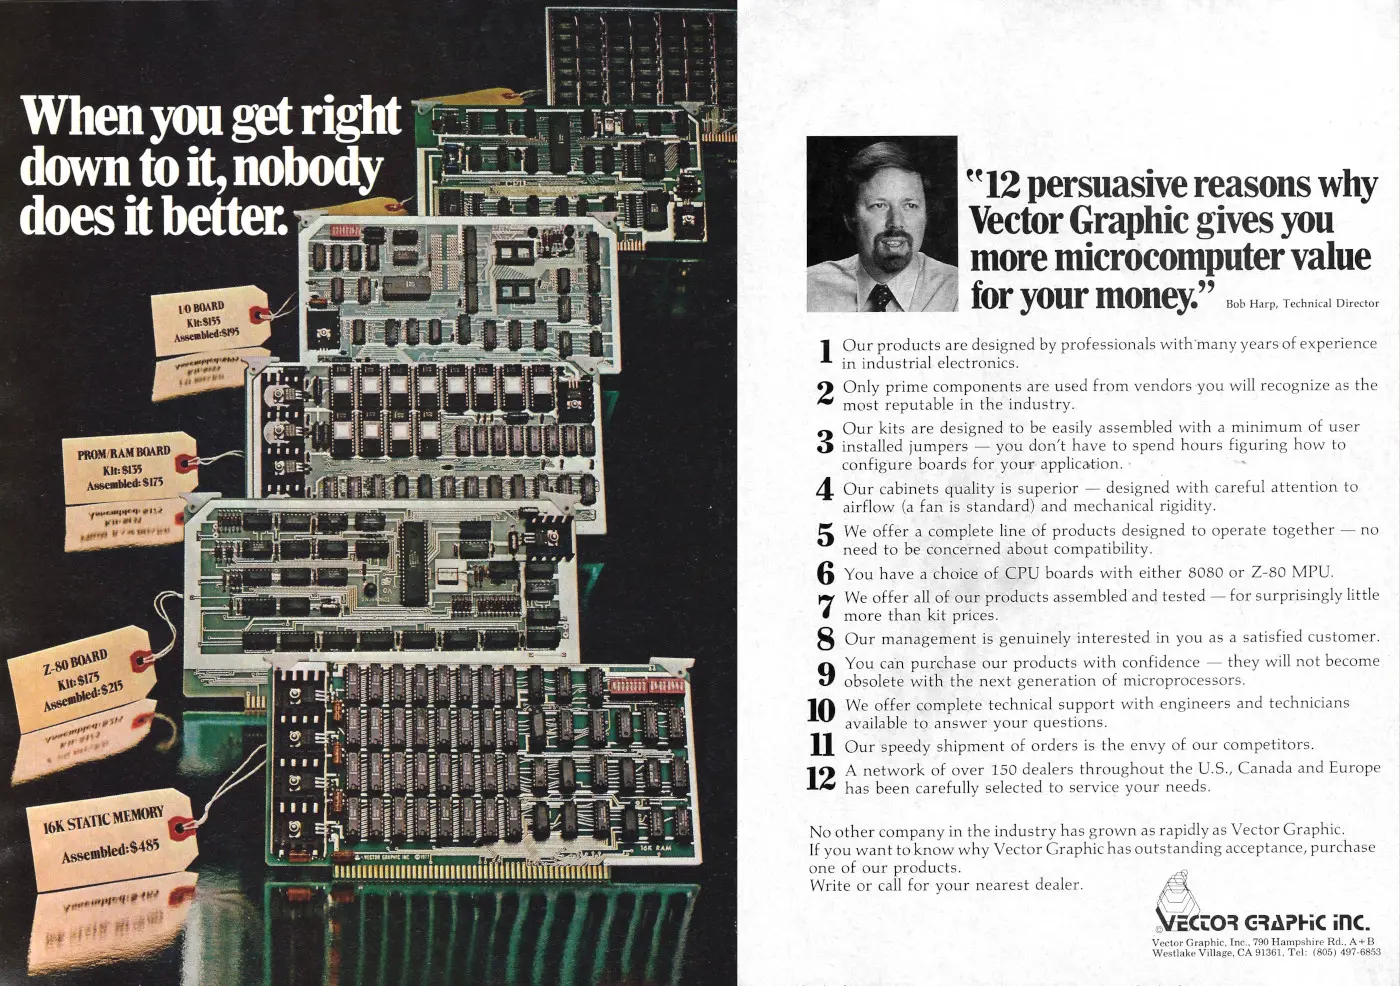 Vector Graphic Advert: When you get right down to it, nobody does it better, from Byte - The Small Systems Journal, March 1978